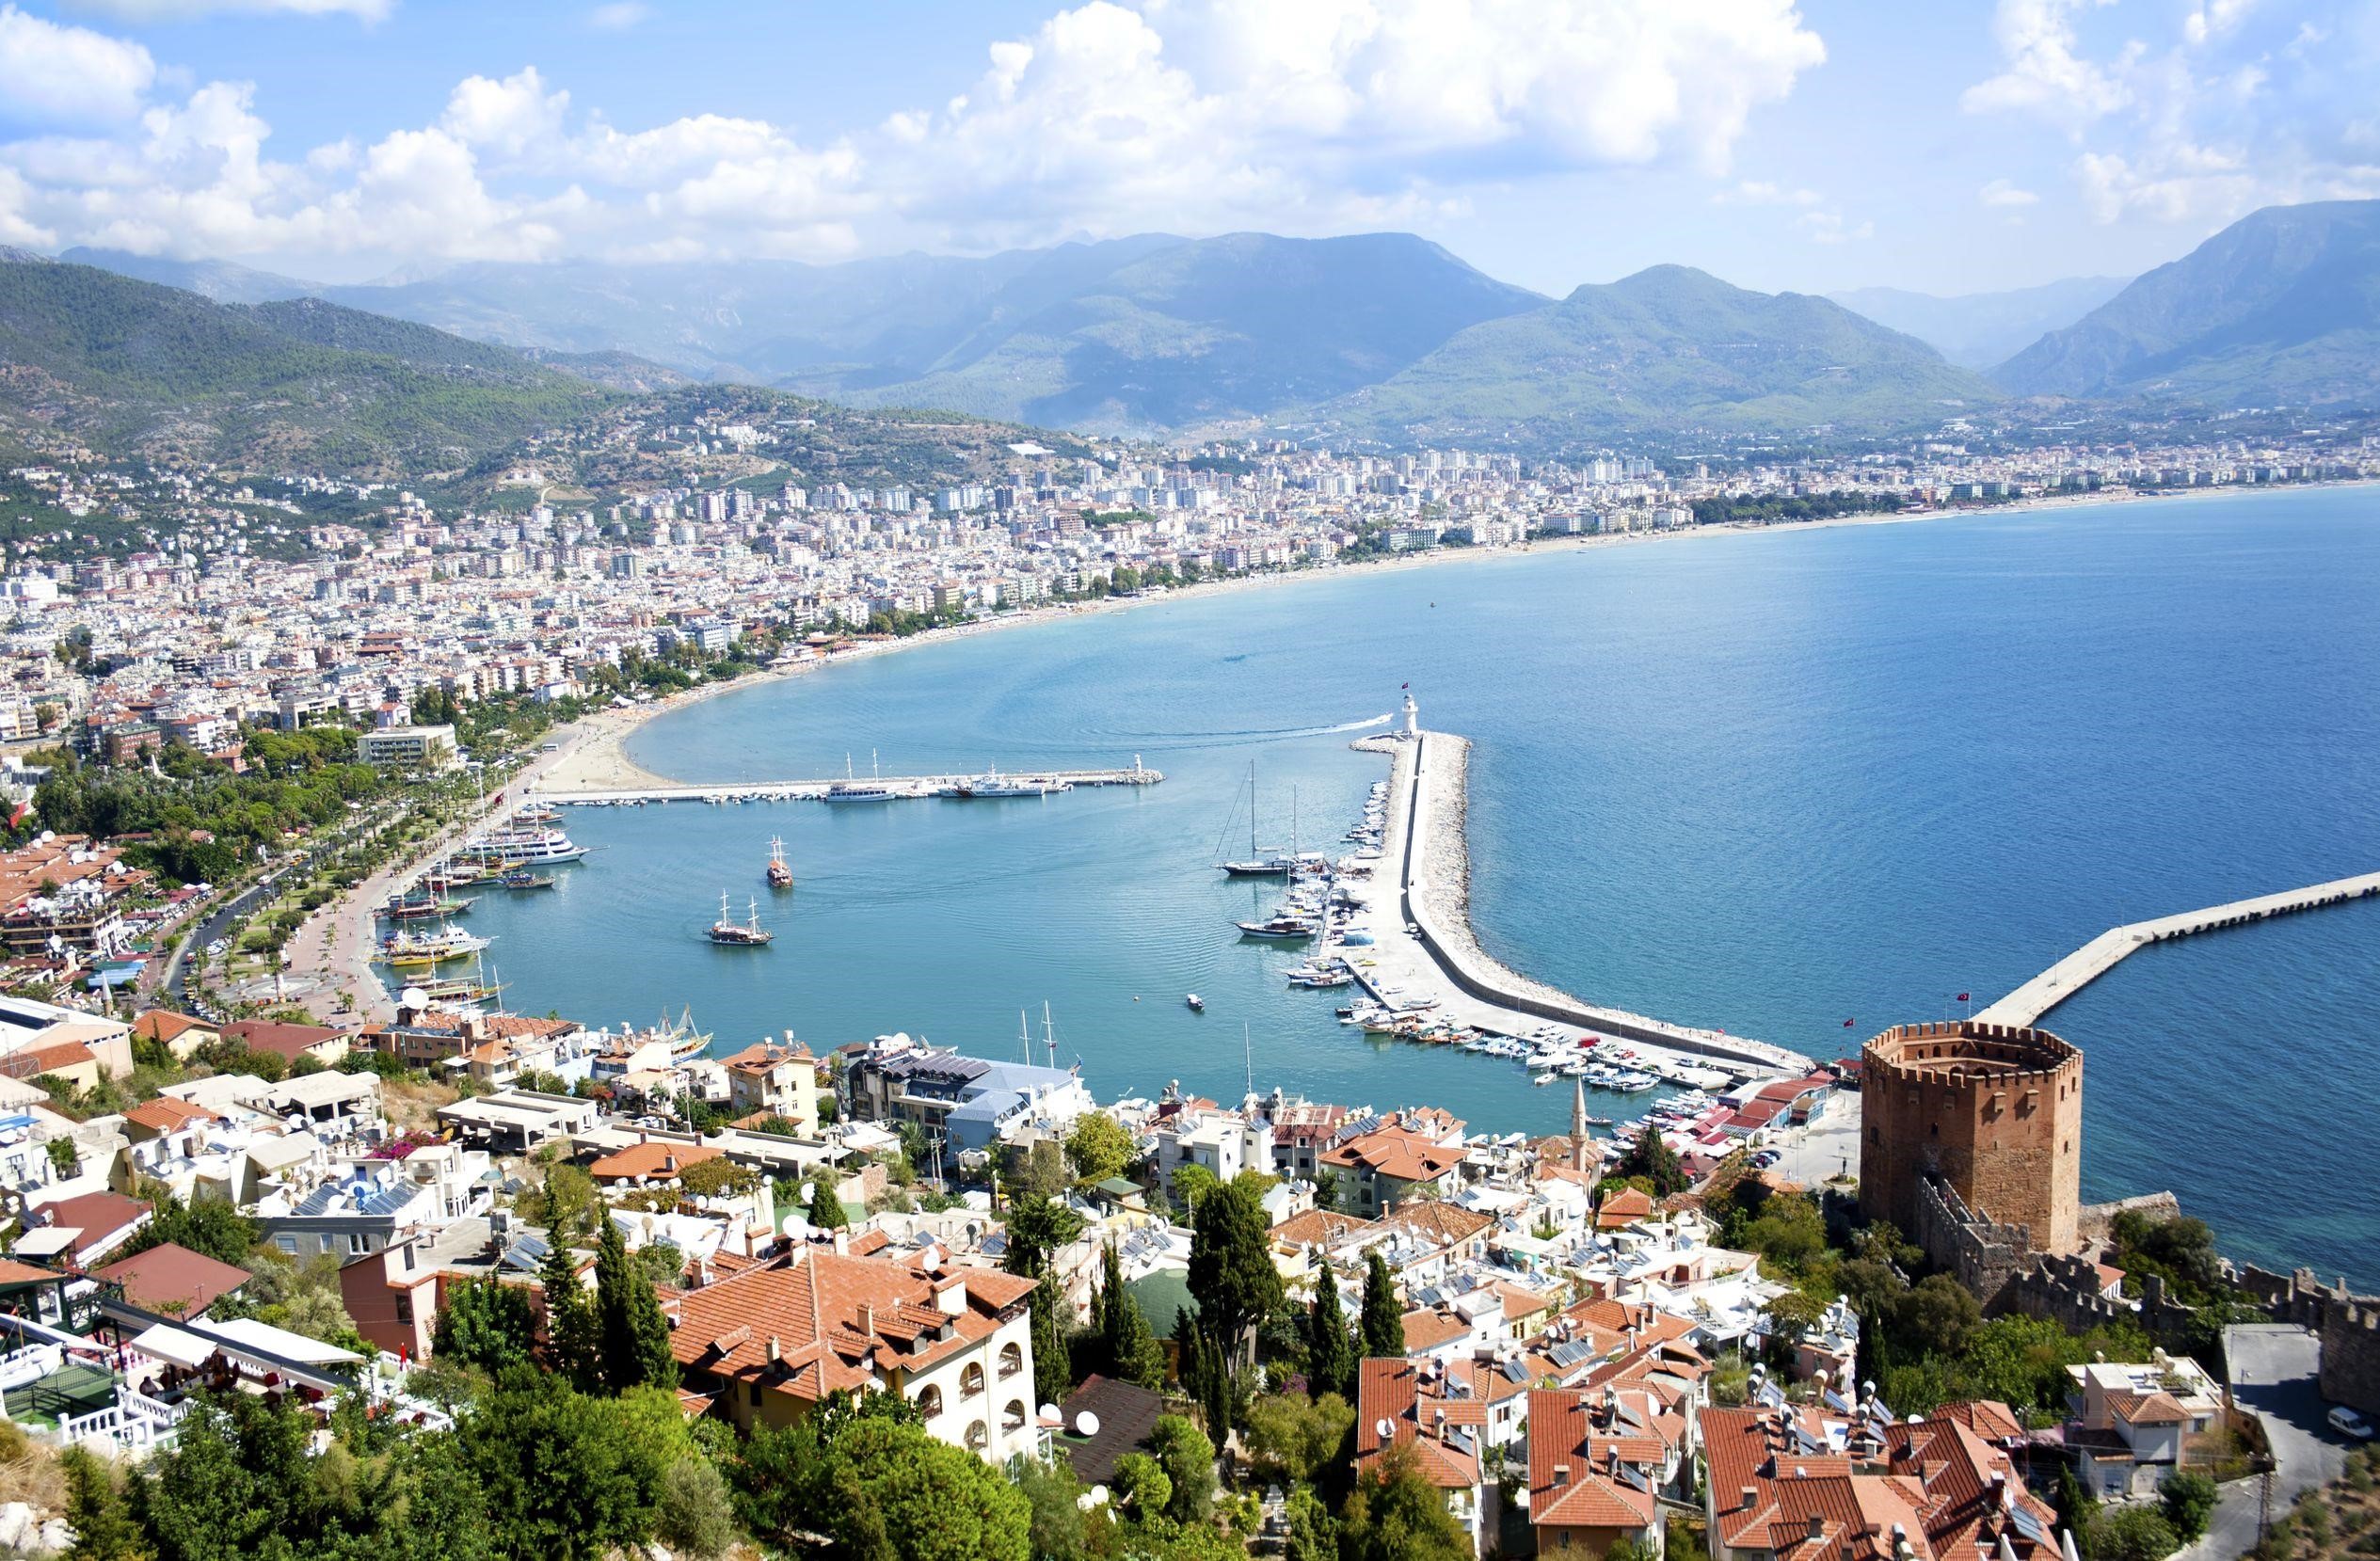 Is Antalya Cheap to Live in